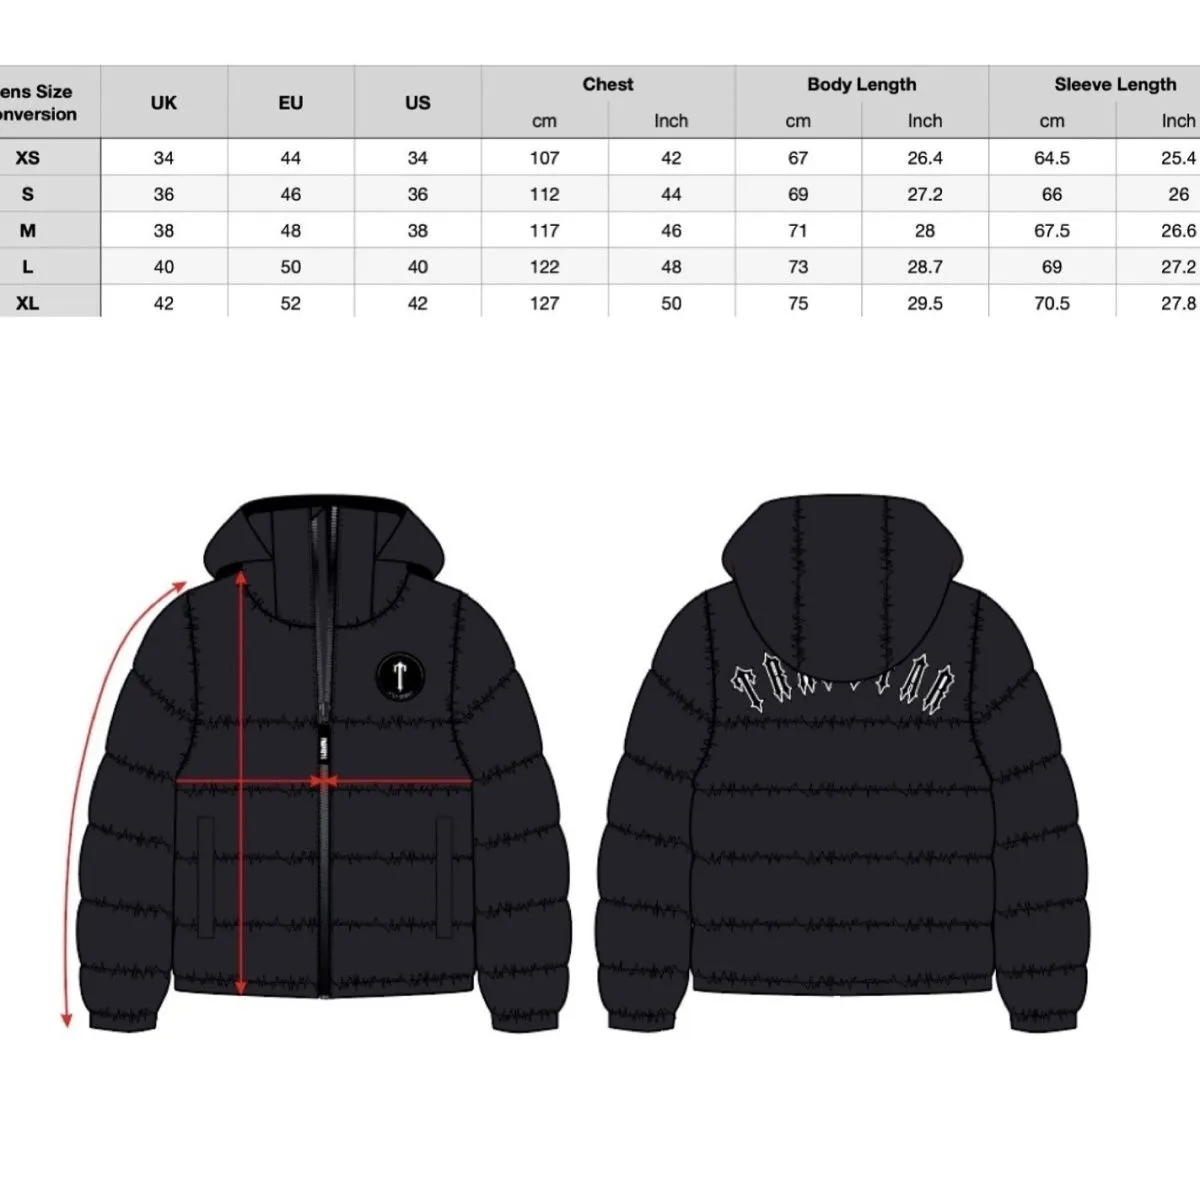 Trapstar for Mens Designer trapstar jacket Down Parka Winter Puffer Jacket Giacca Trapstars Doudoune Homme Thick Warm Windproof Outdoorcoat with Removable Cap